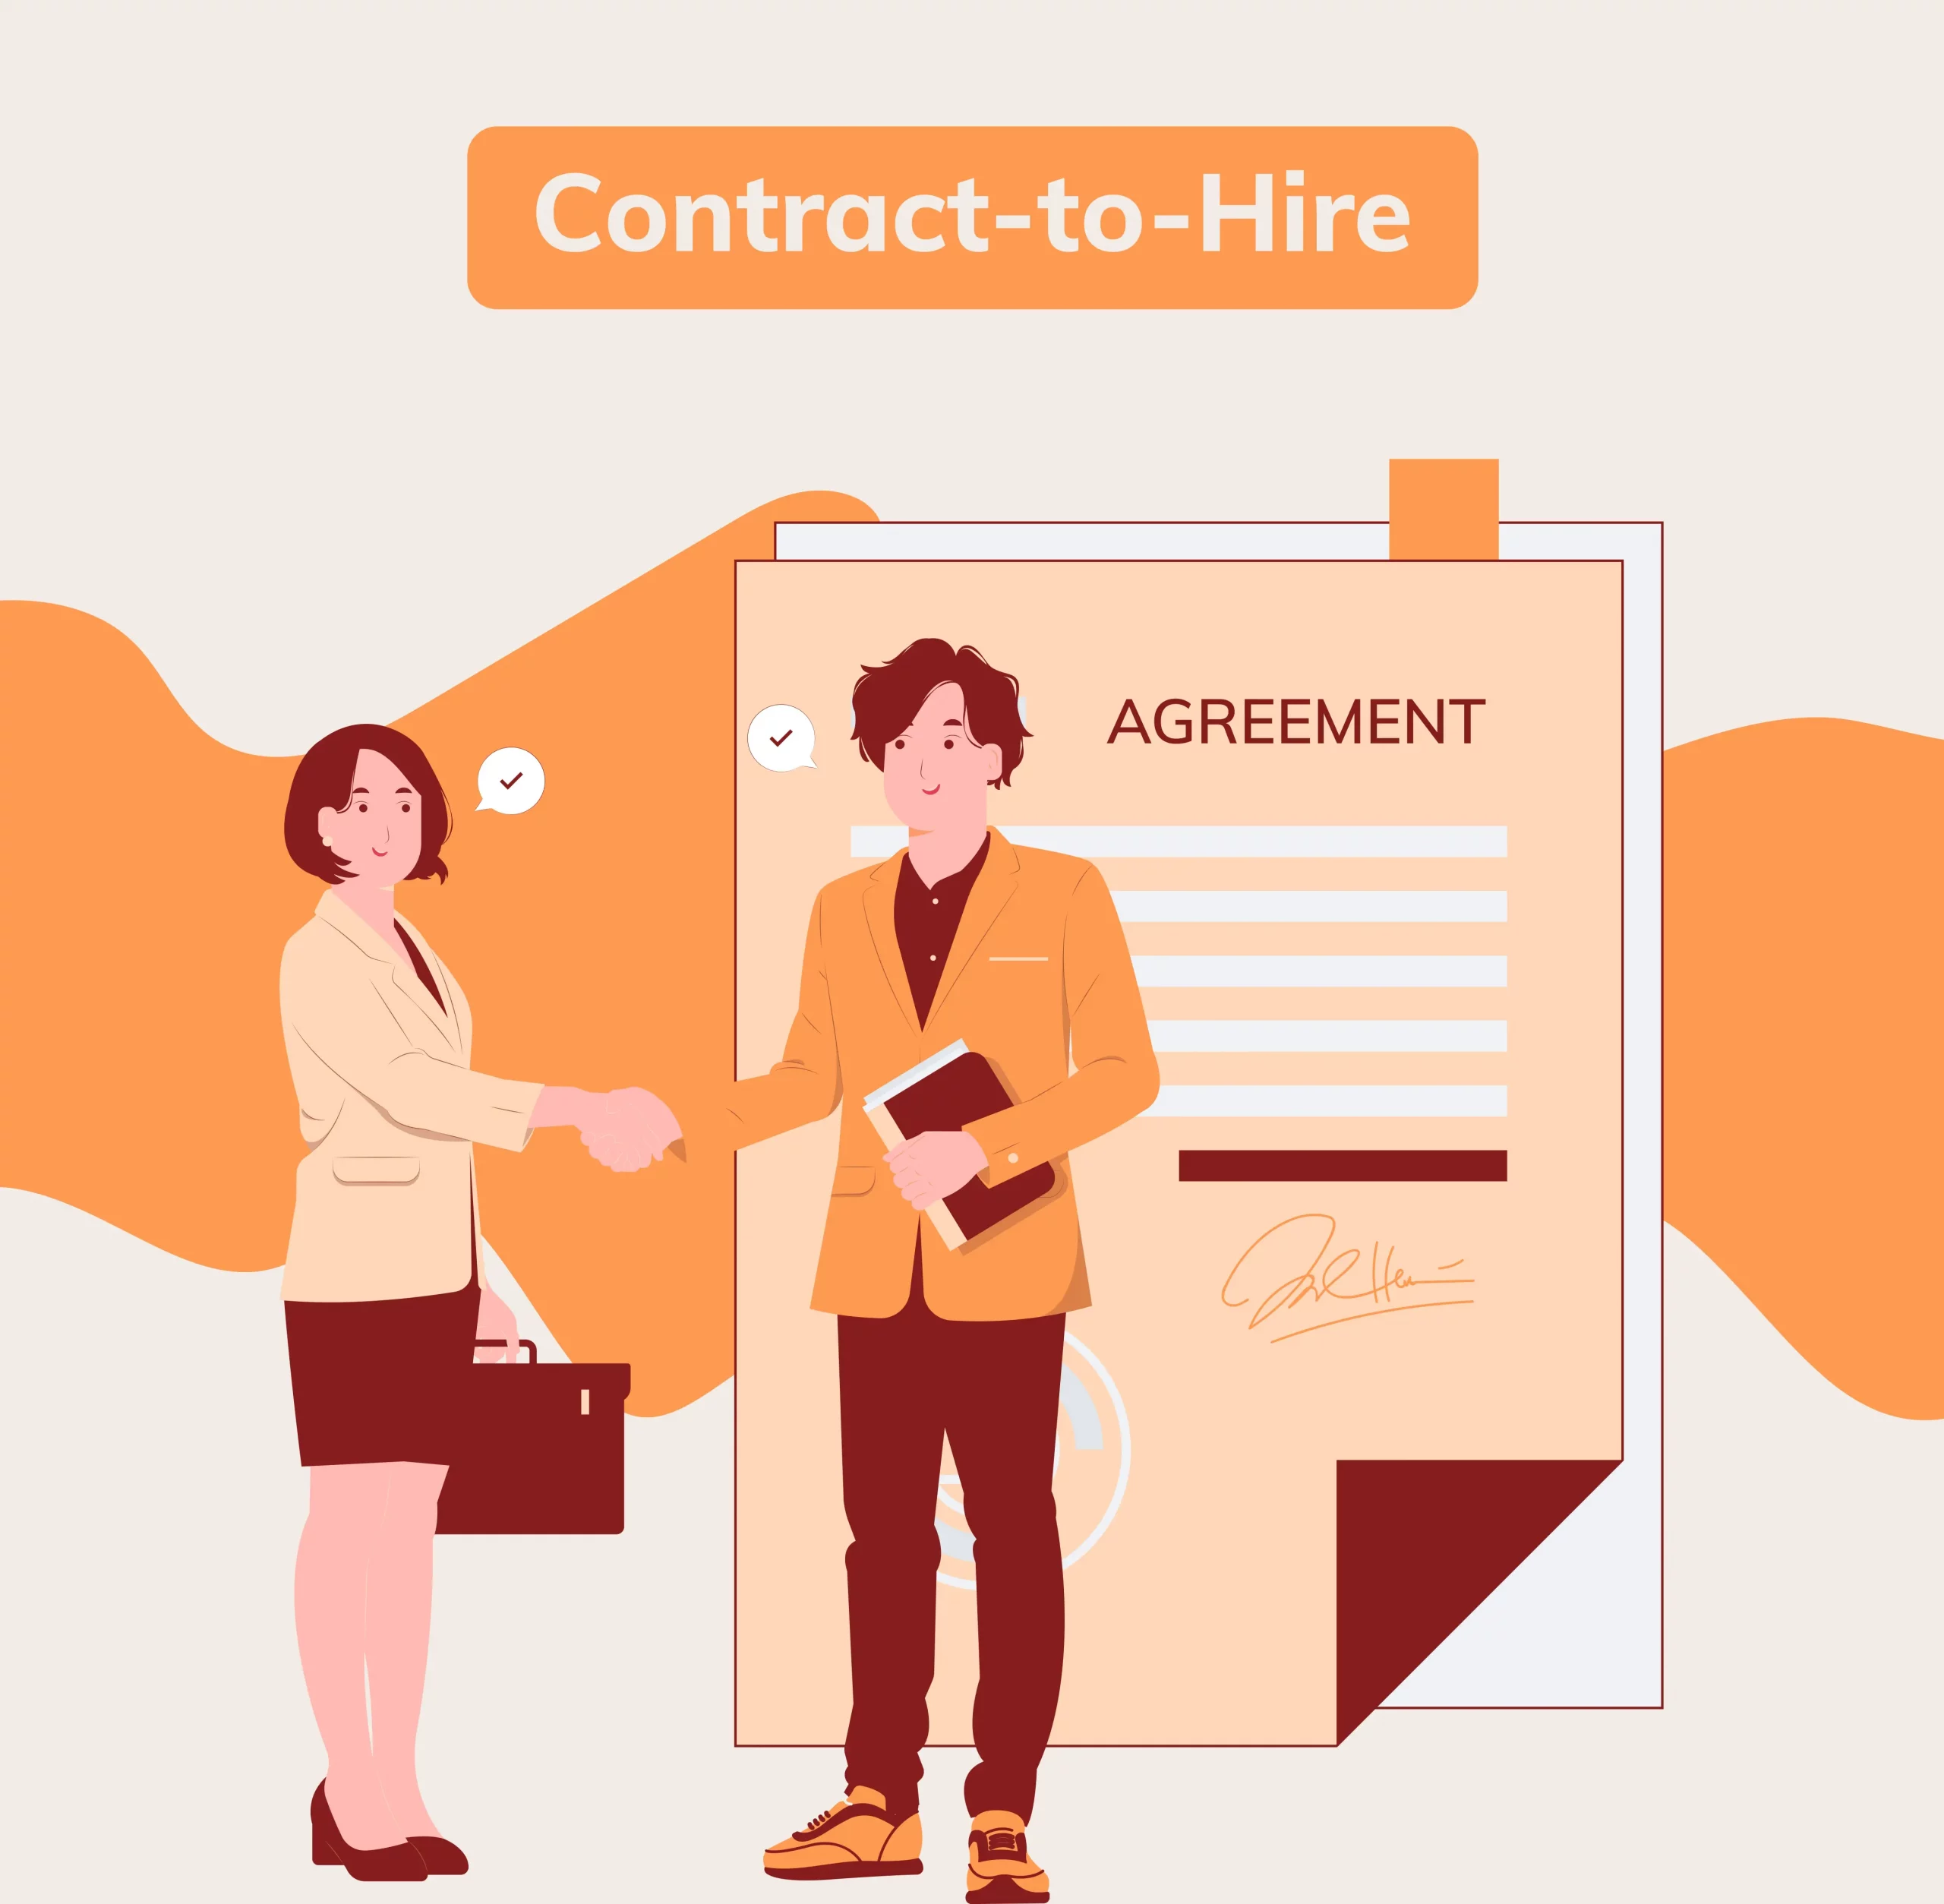 Contract-to-hire